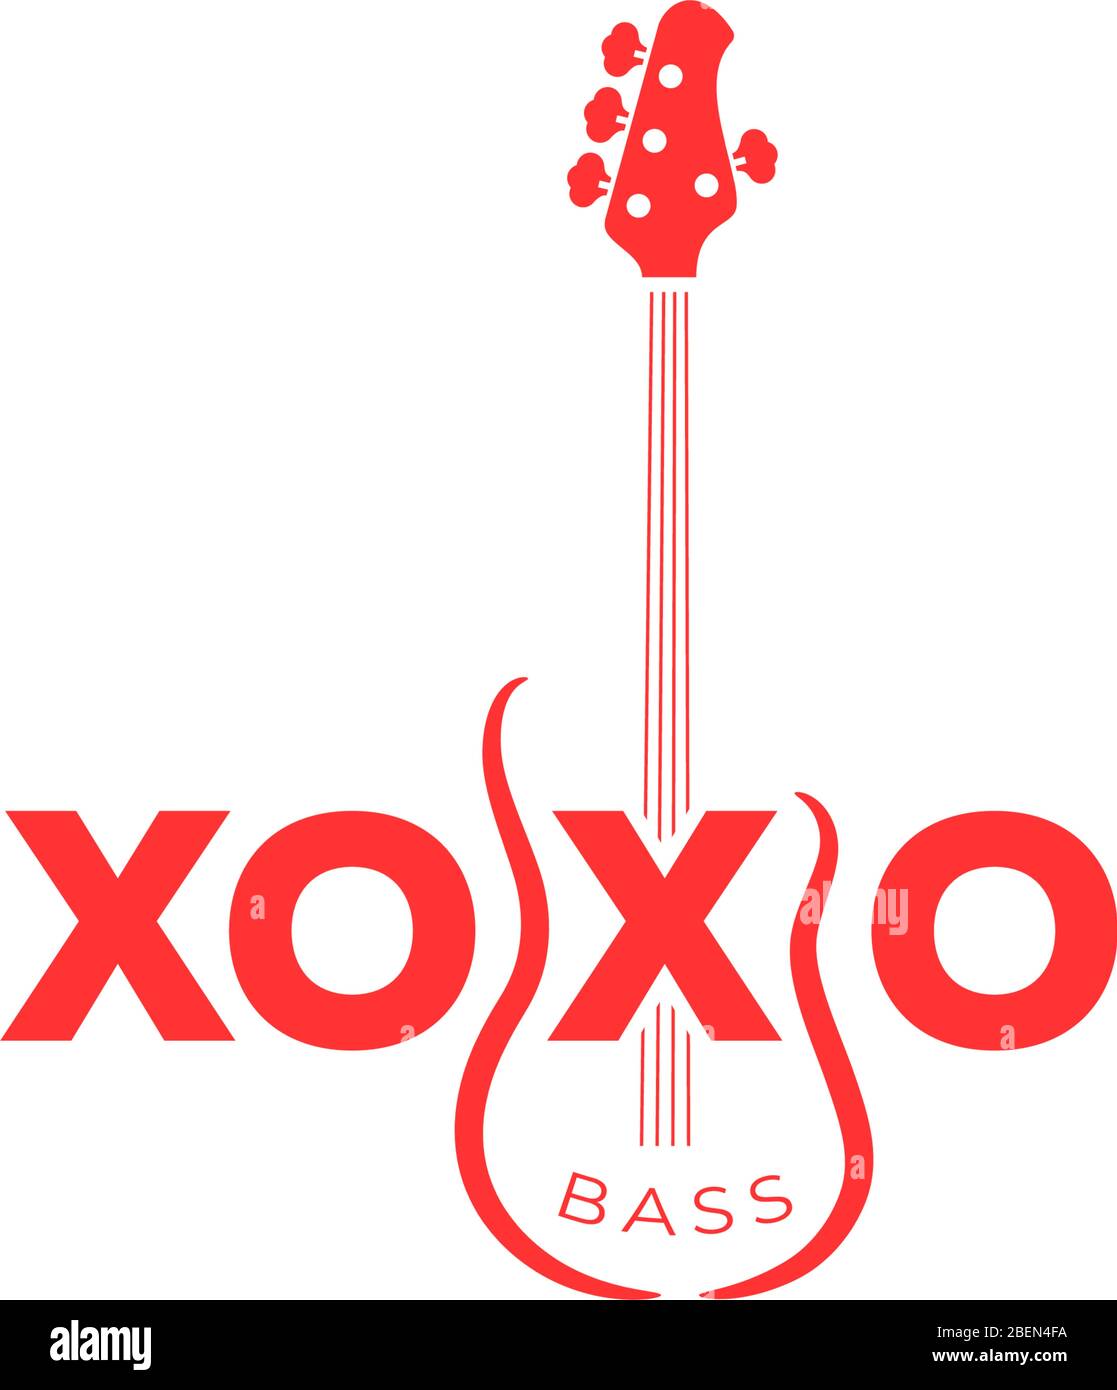 logo design about bass guitar player concept with bass illustration in vector Stock Vector